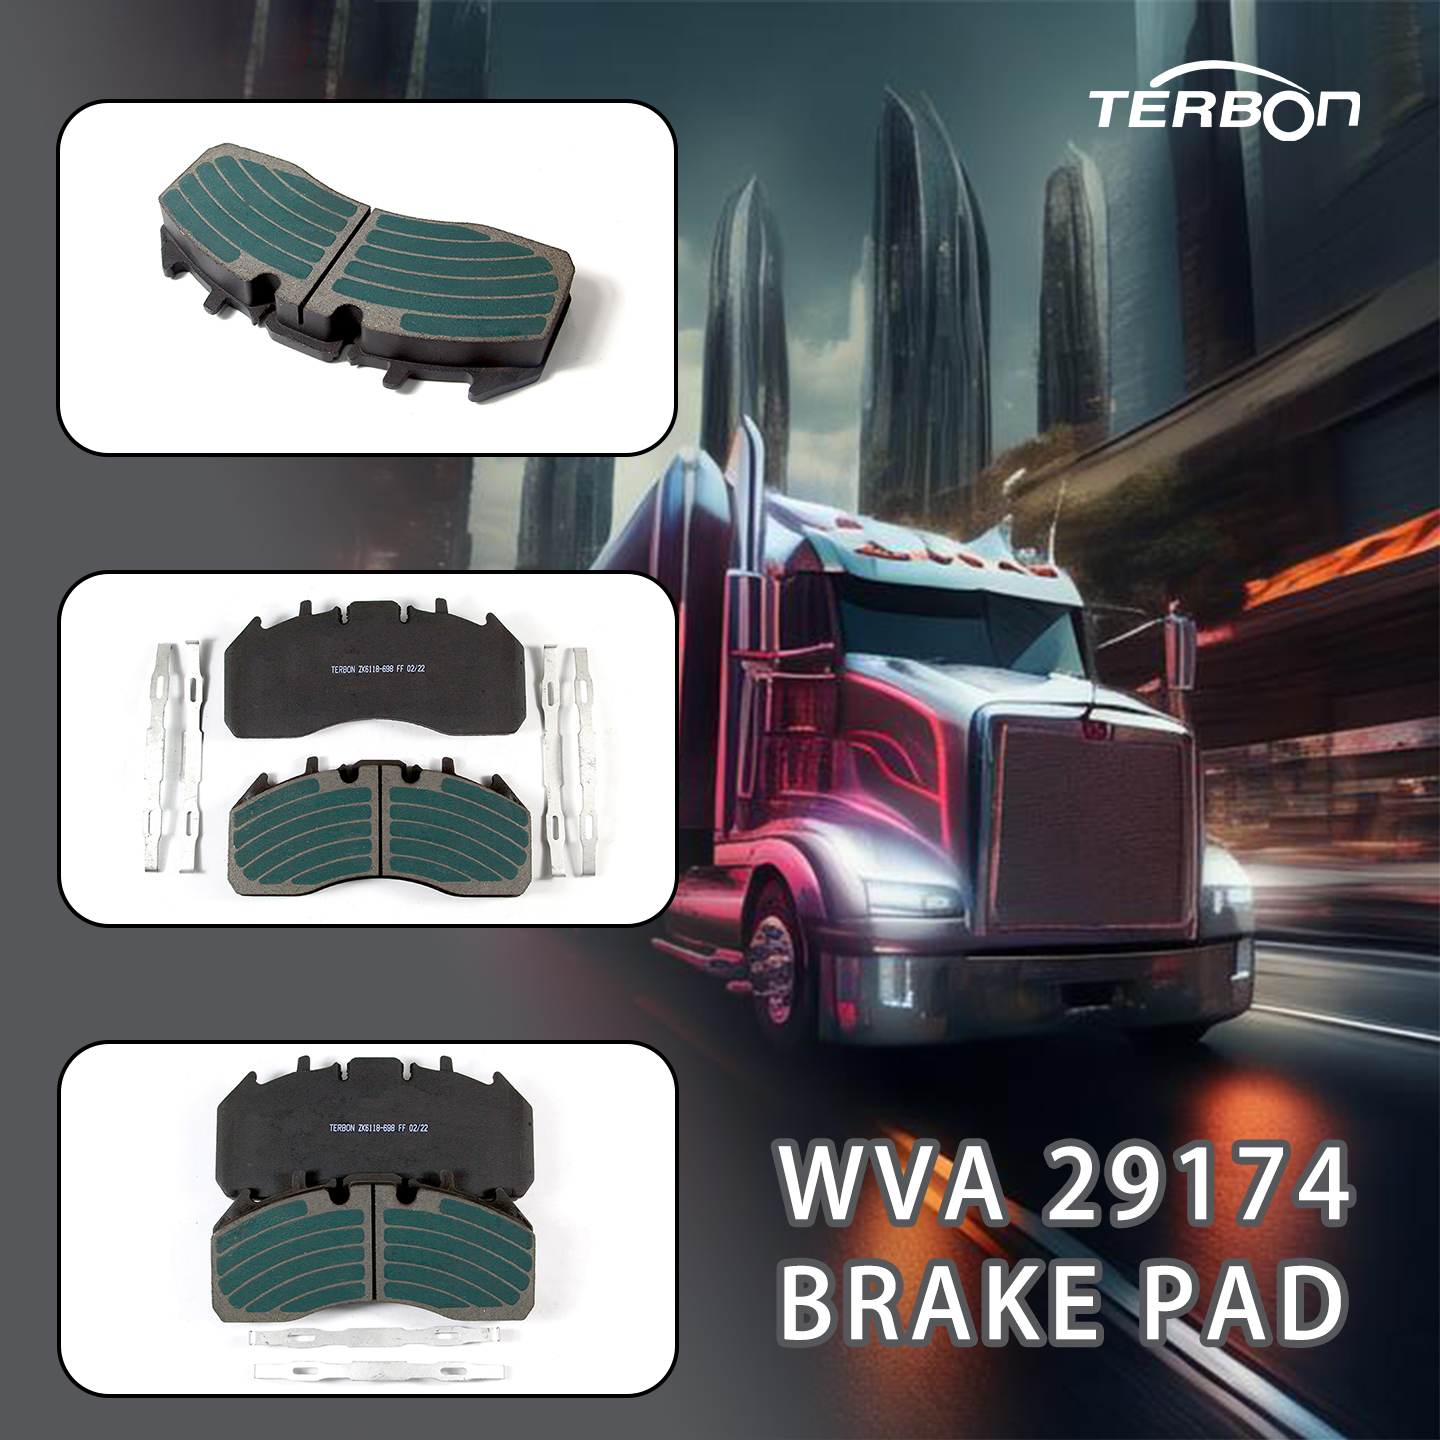 New product release: TERBON high-quality WVA 29174 brake pads for your heavy-duty trucks